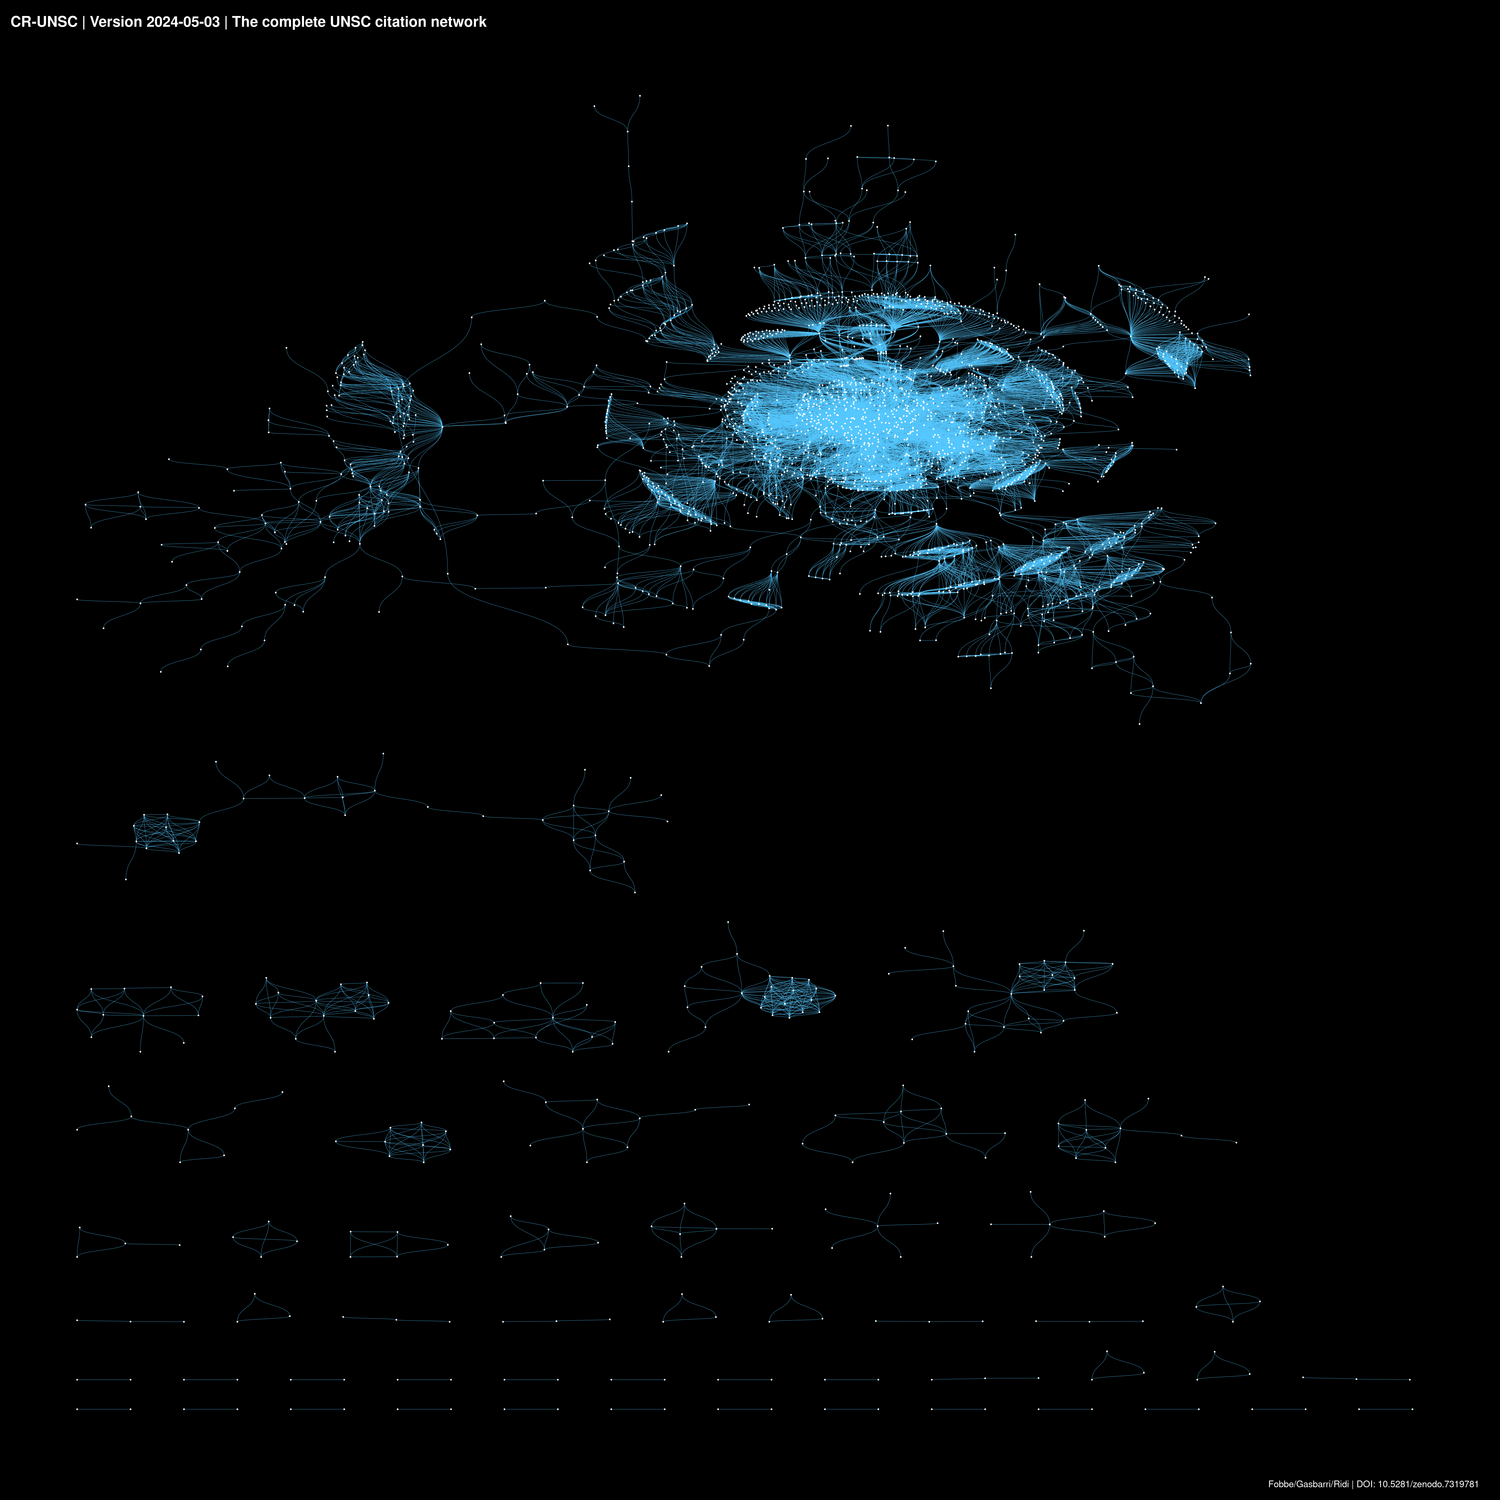 A visual representation of the UN Security Council internal citation network up to resolution 2722. It was created with {ggraph} and a high-resolution version of the image is published in the &lsquo;analysis&rsquo; ZIP archive released with the CR-UNSC.